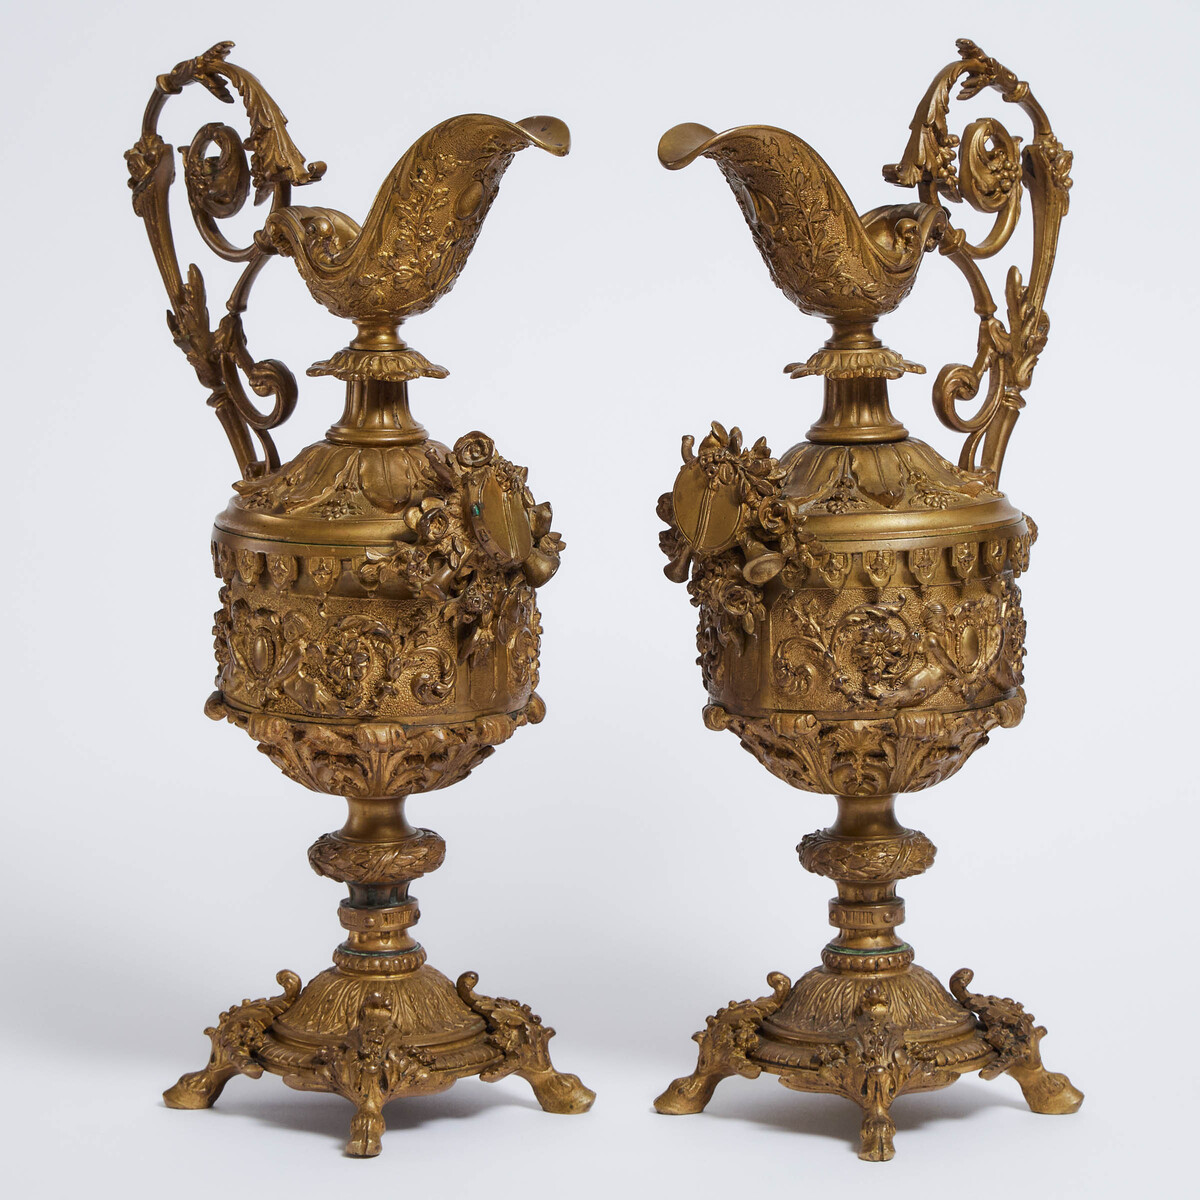 Pair of French Belle Epoque Bronze Ewers, early 20th century, each height 16 in — 40.6 cm (2 Pieces)